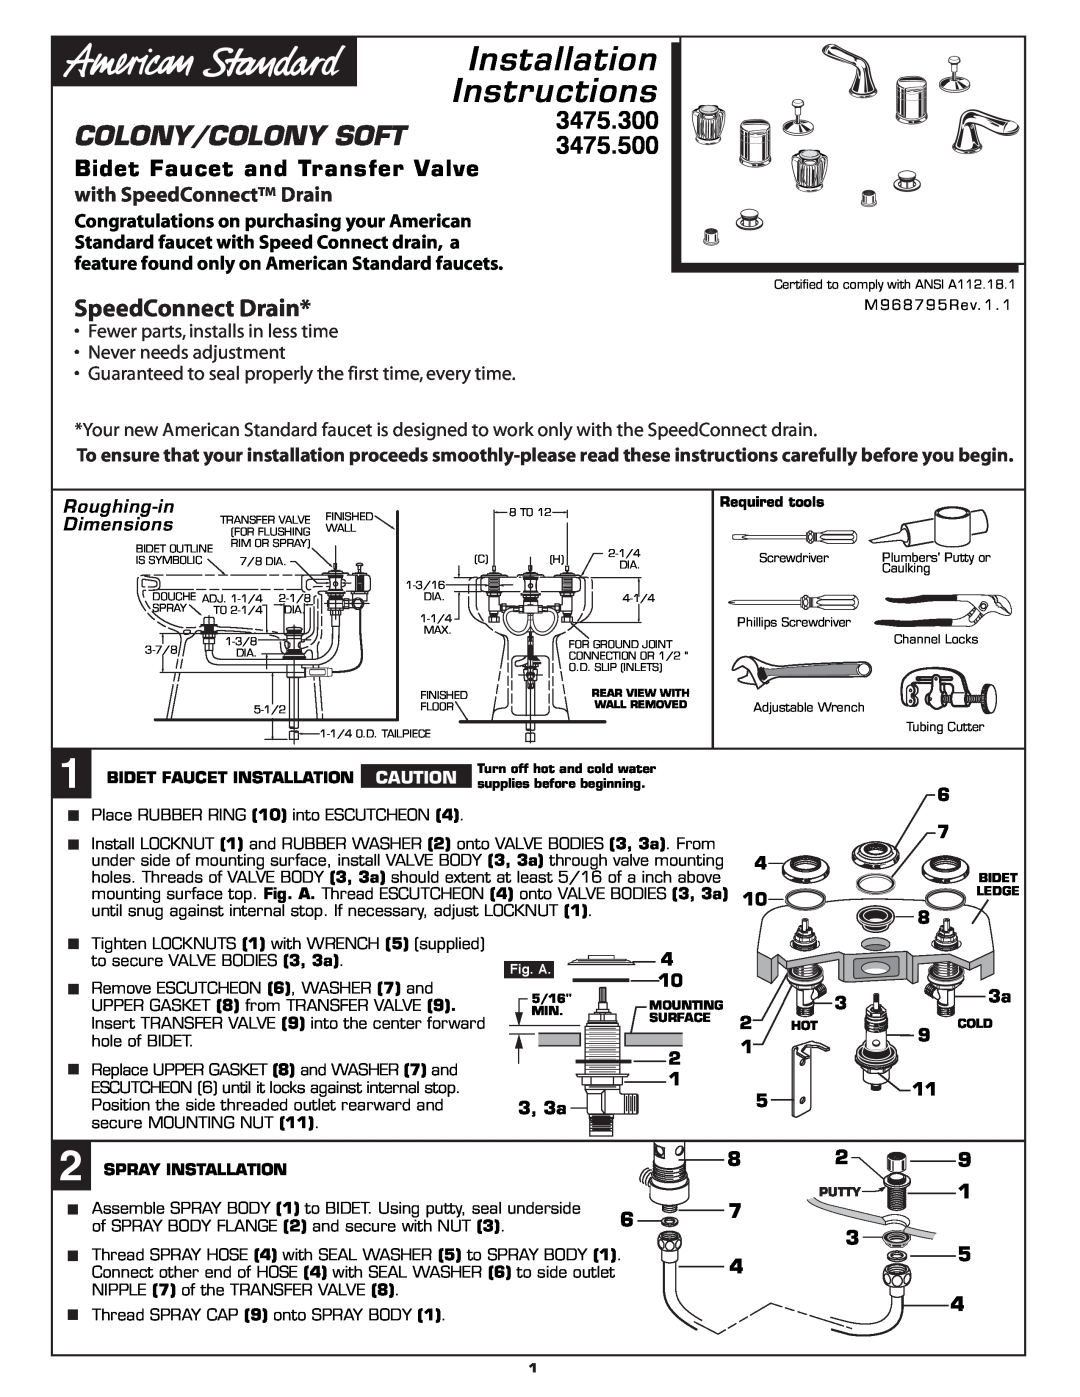 American Standard 3475.500 installation instructions 3475.300, Bidet Faucet and Transfer Valve, with SpeedConnect Drain 